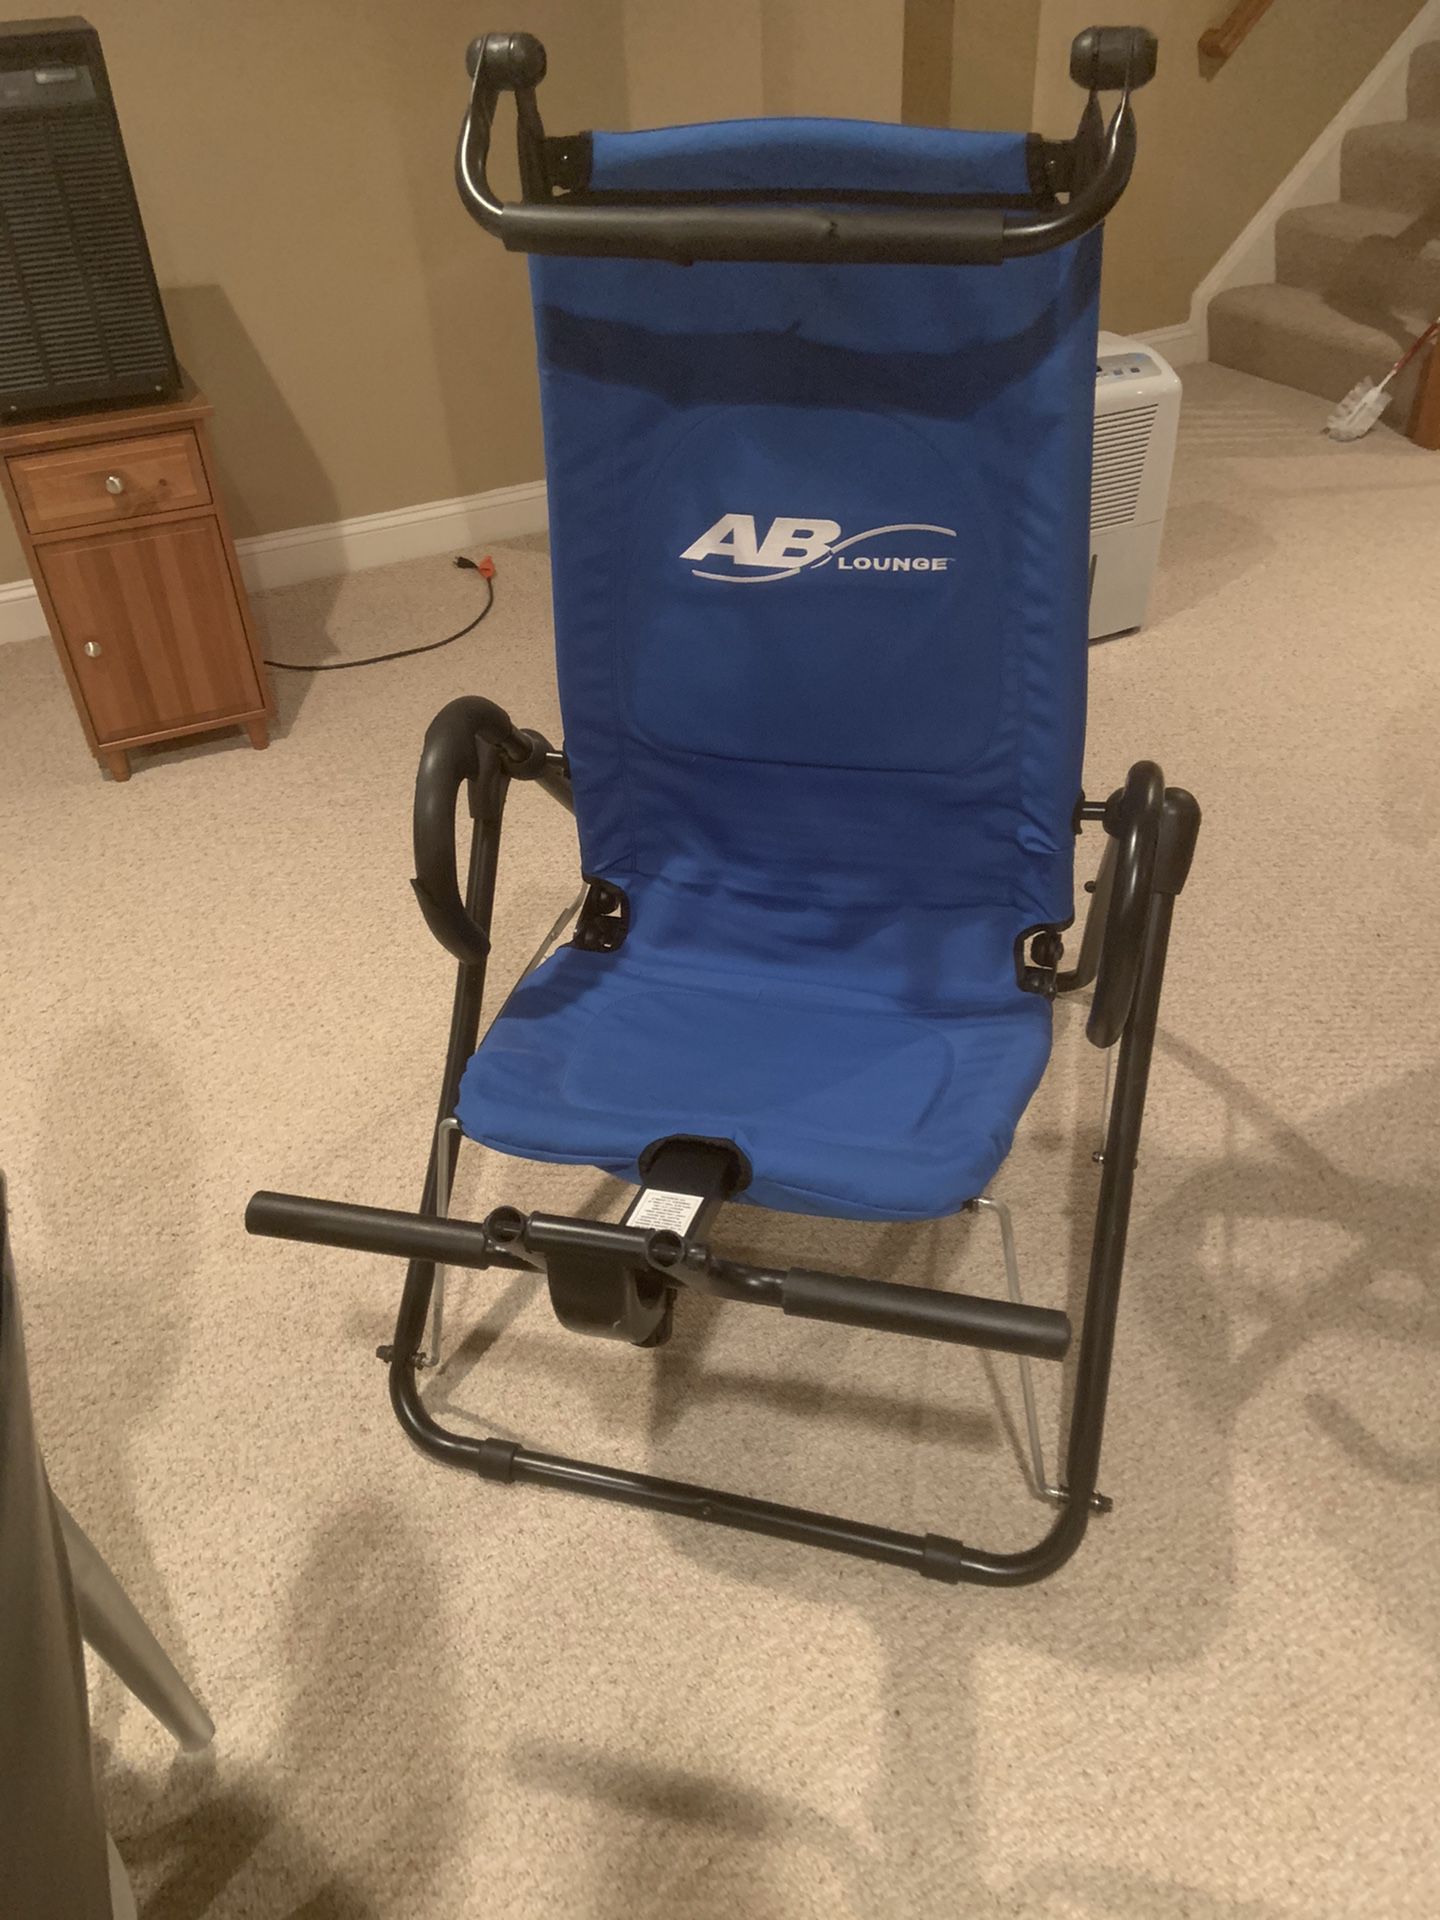 Ab lounge chair/ sit-up crunch Exercise